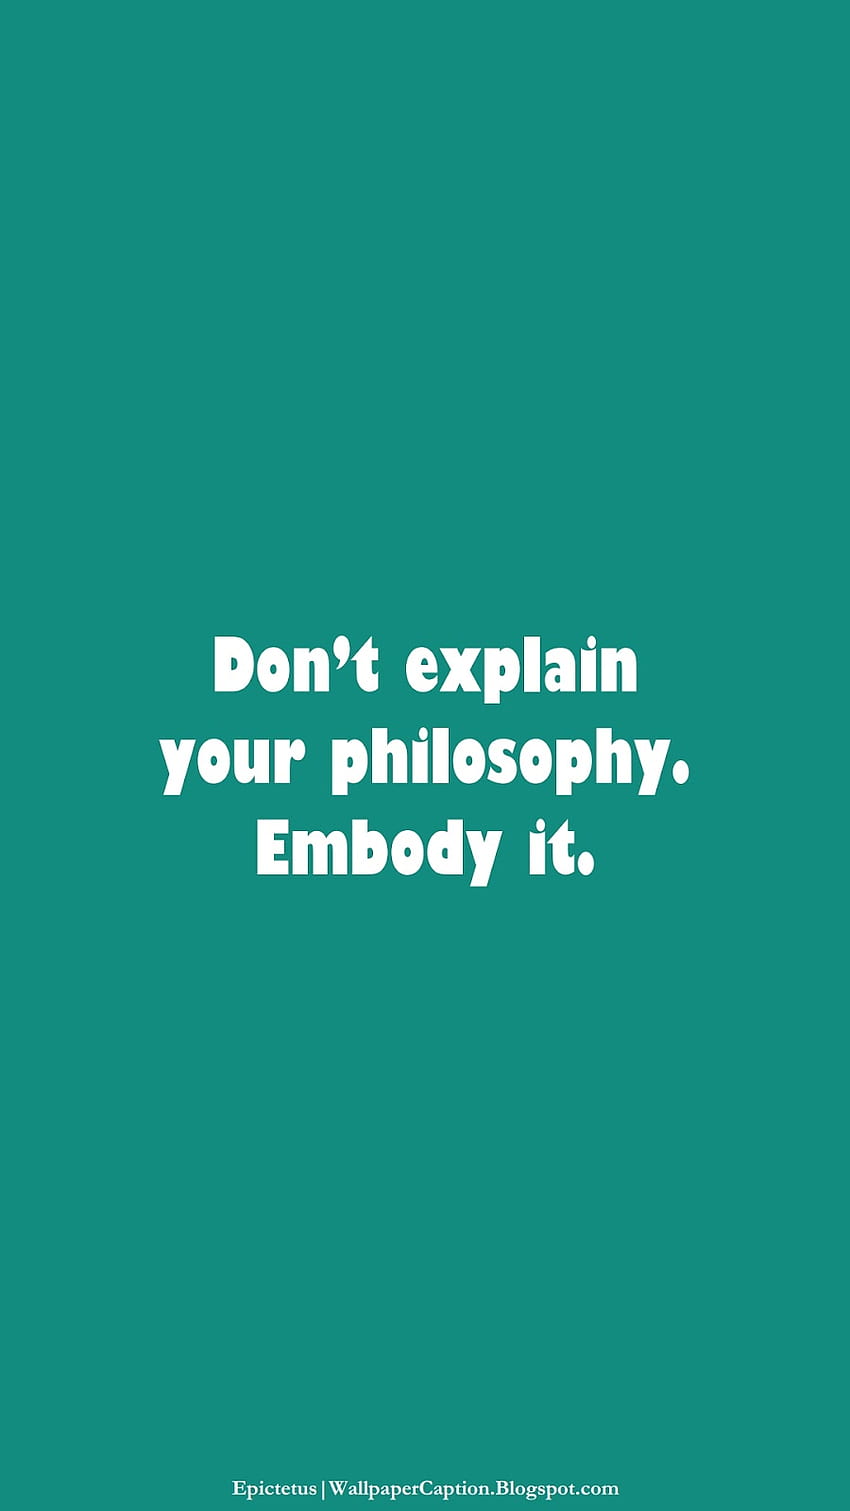 Phone with Short Quotes (Part 13.7 Teal Green WhatsApp) - Caption, Philosophy Phone wallpaper ponsel HD